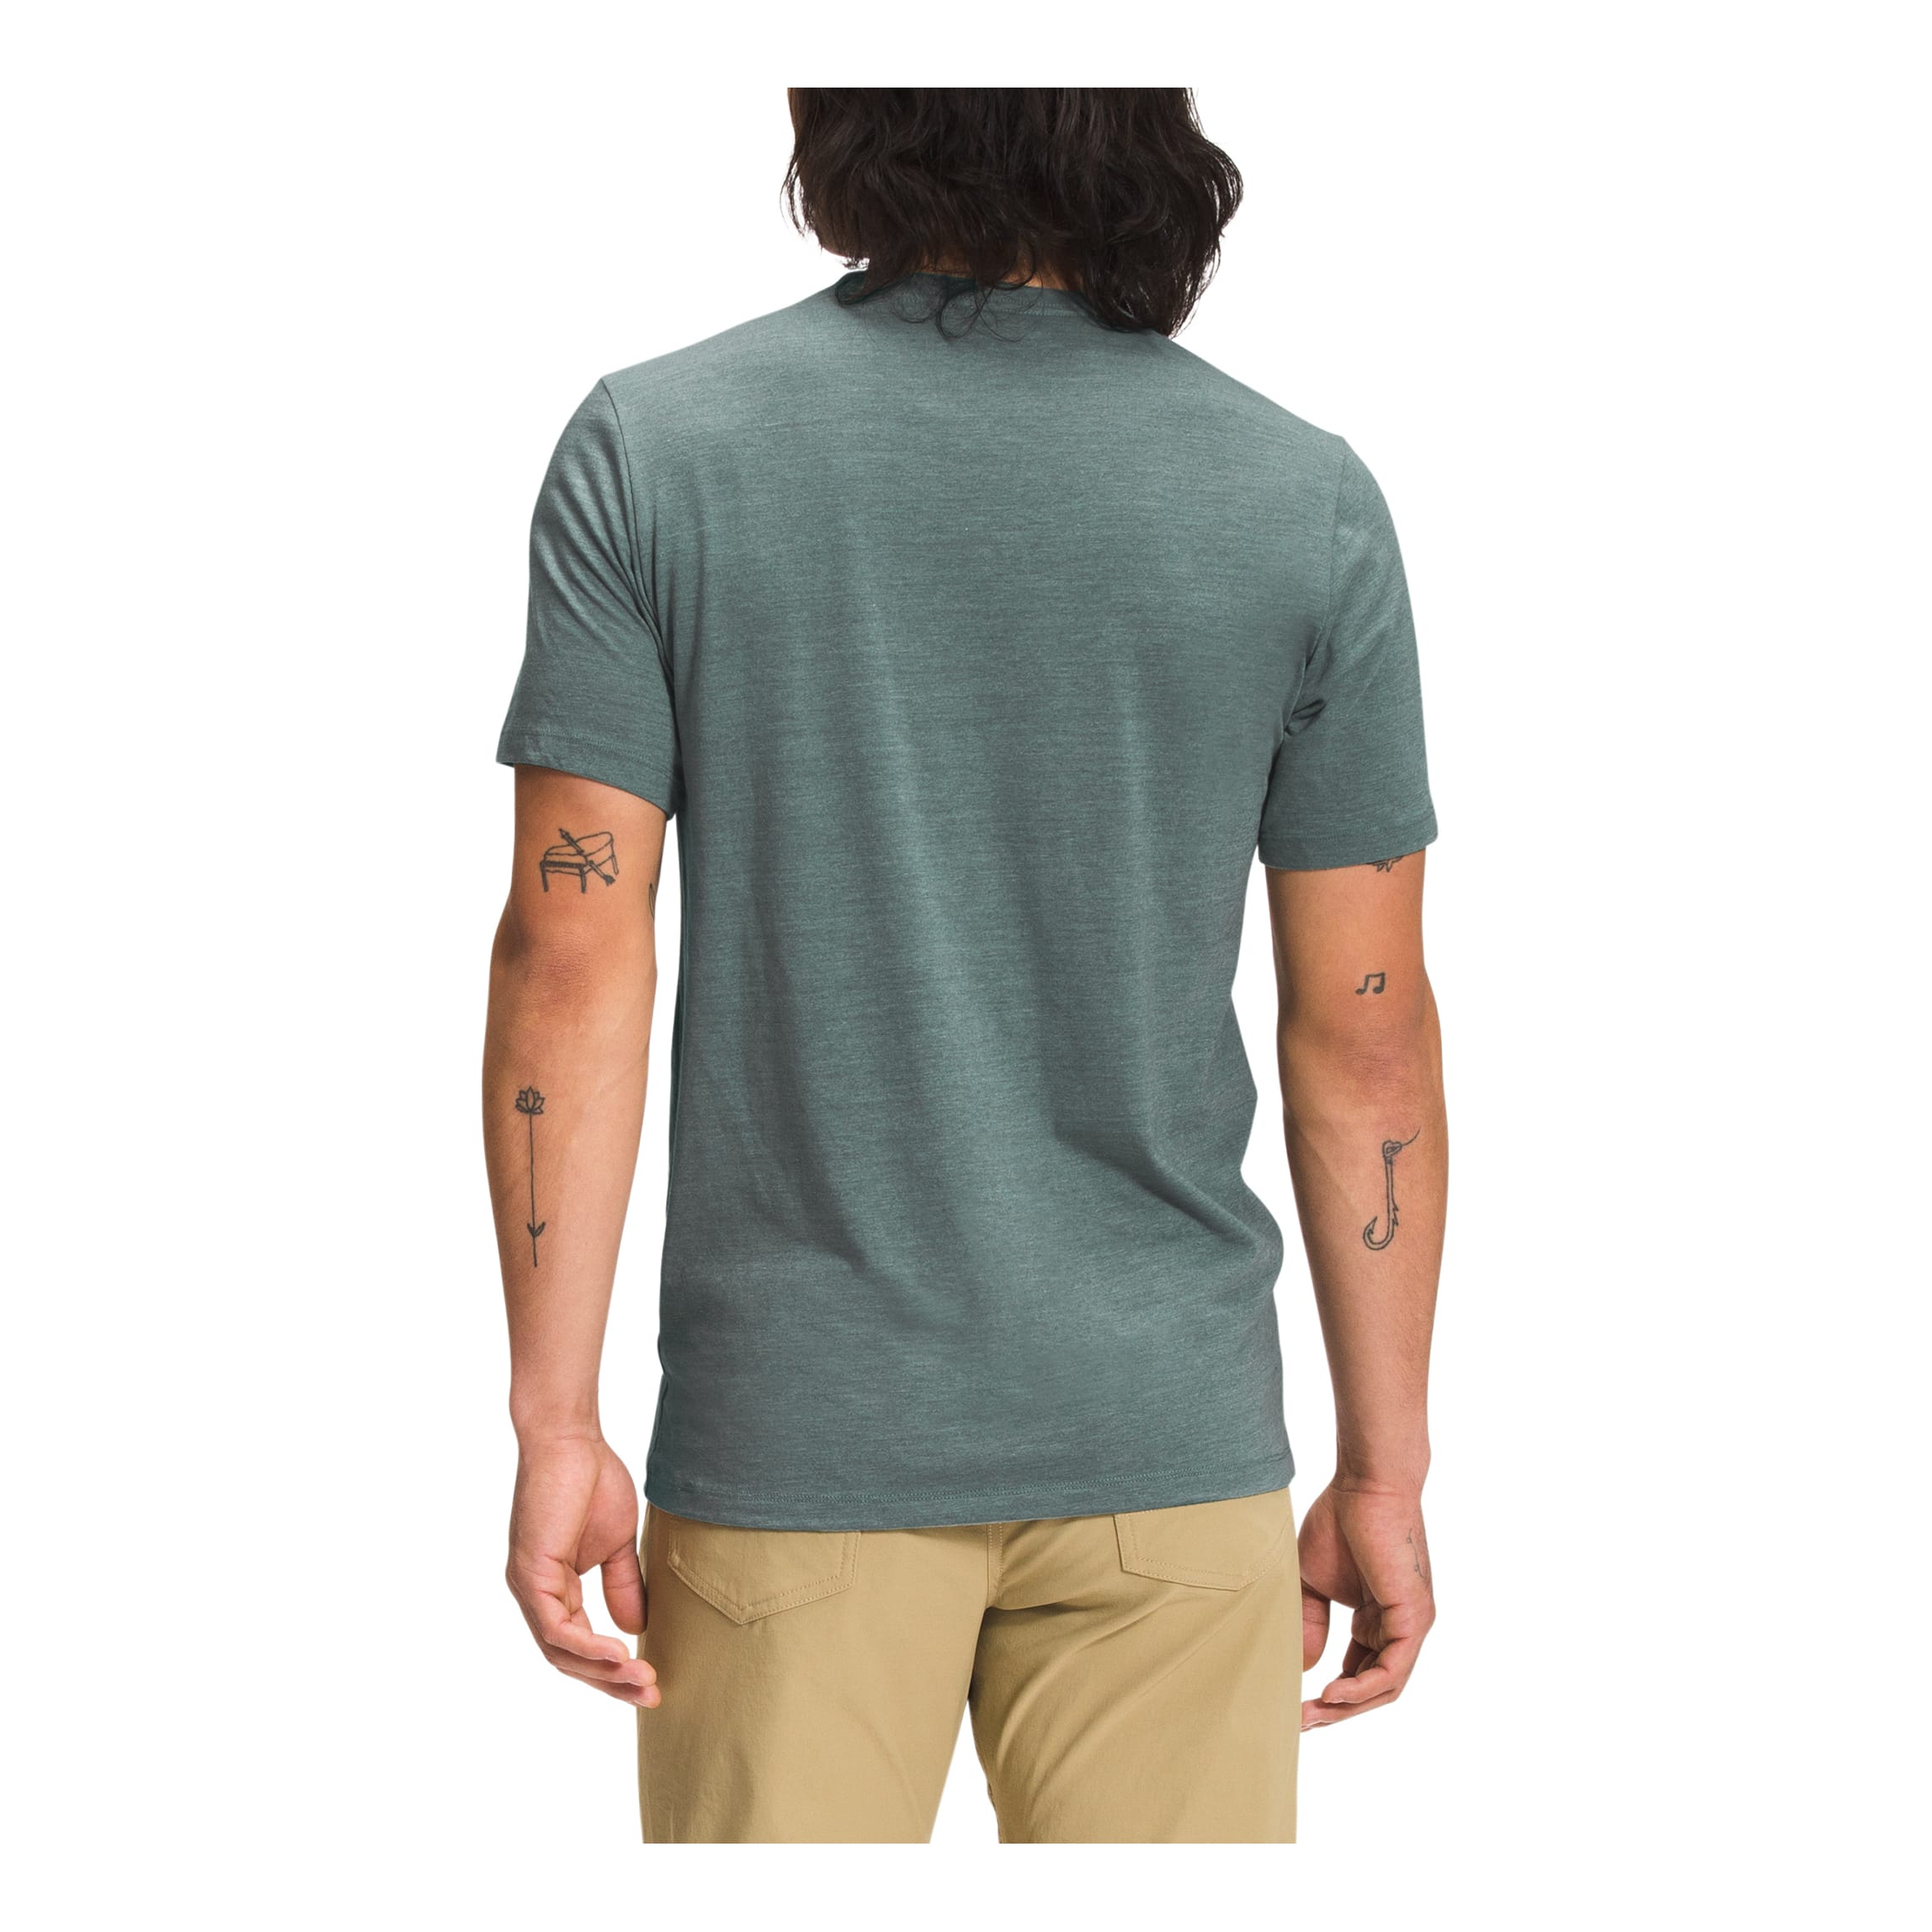 The North Face® Men’s Half Dome Tri-Blend Short-Sleeve T-Shirt